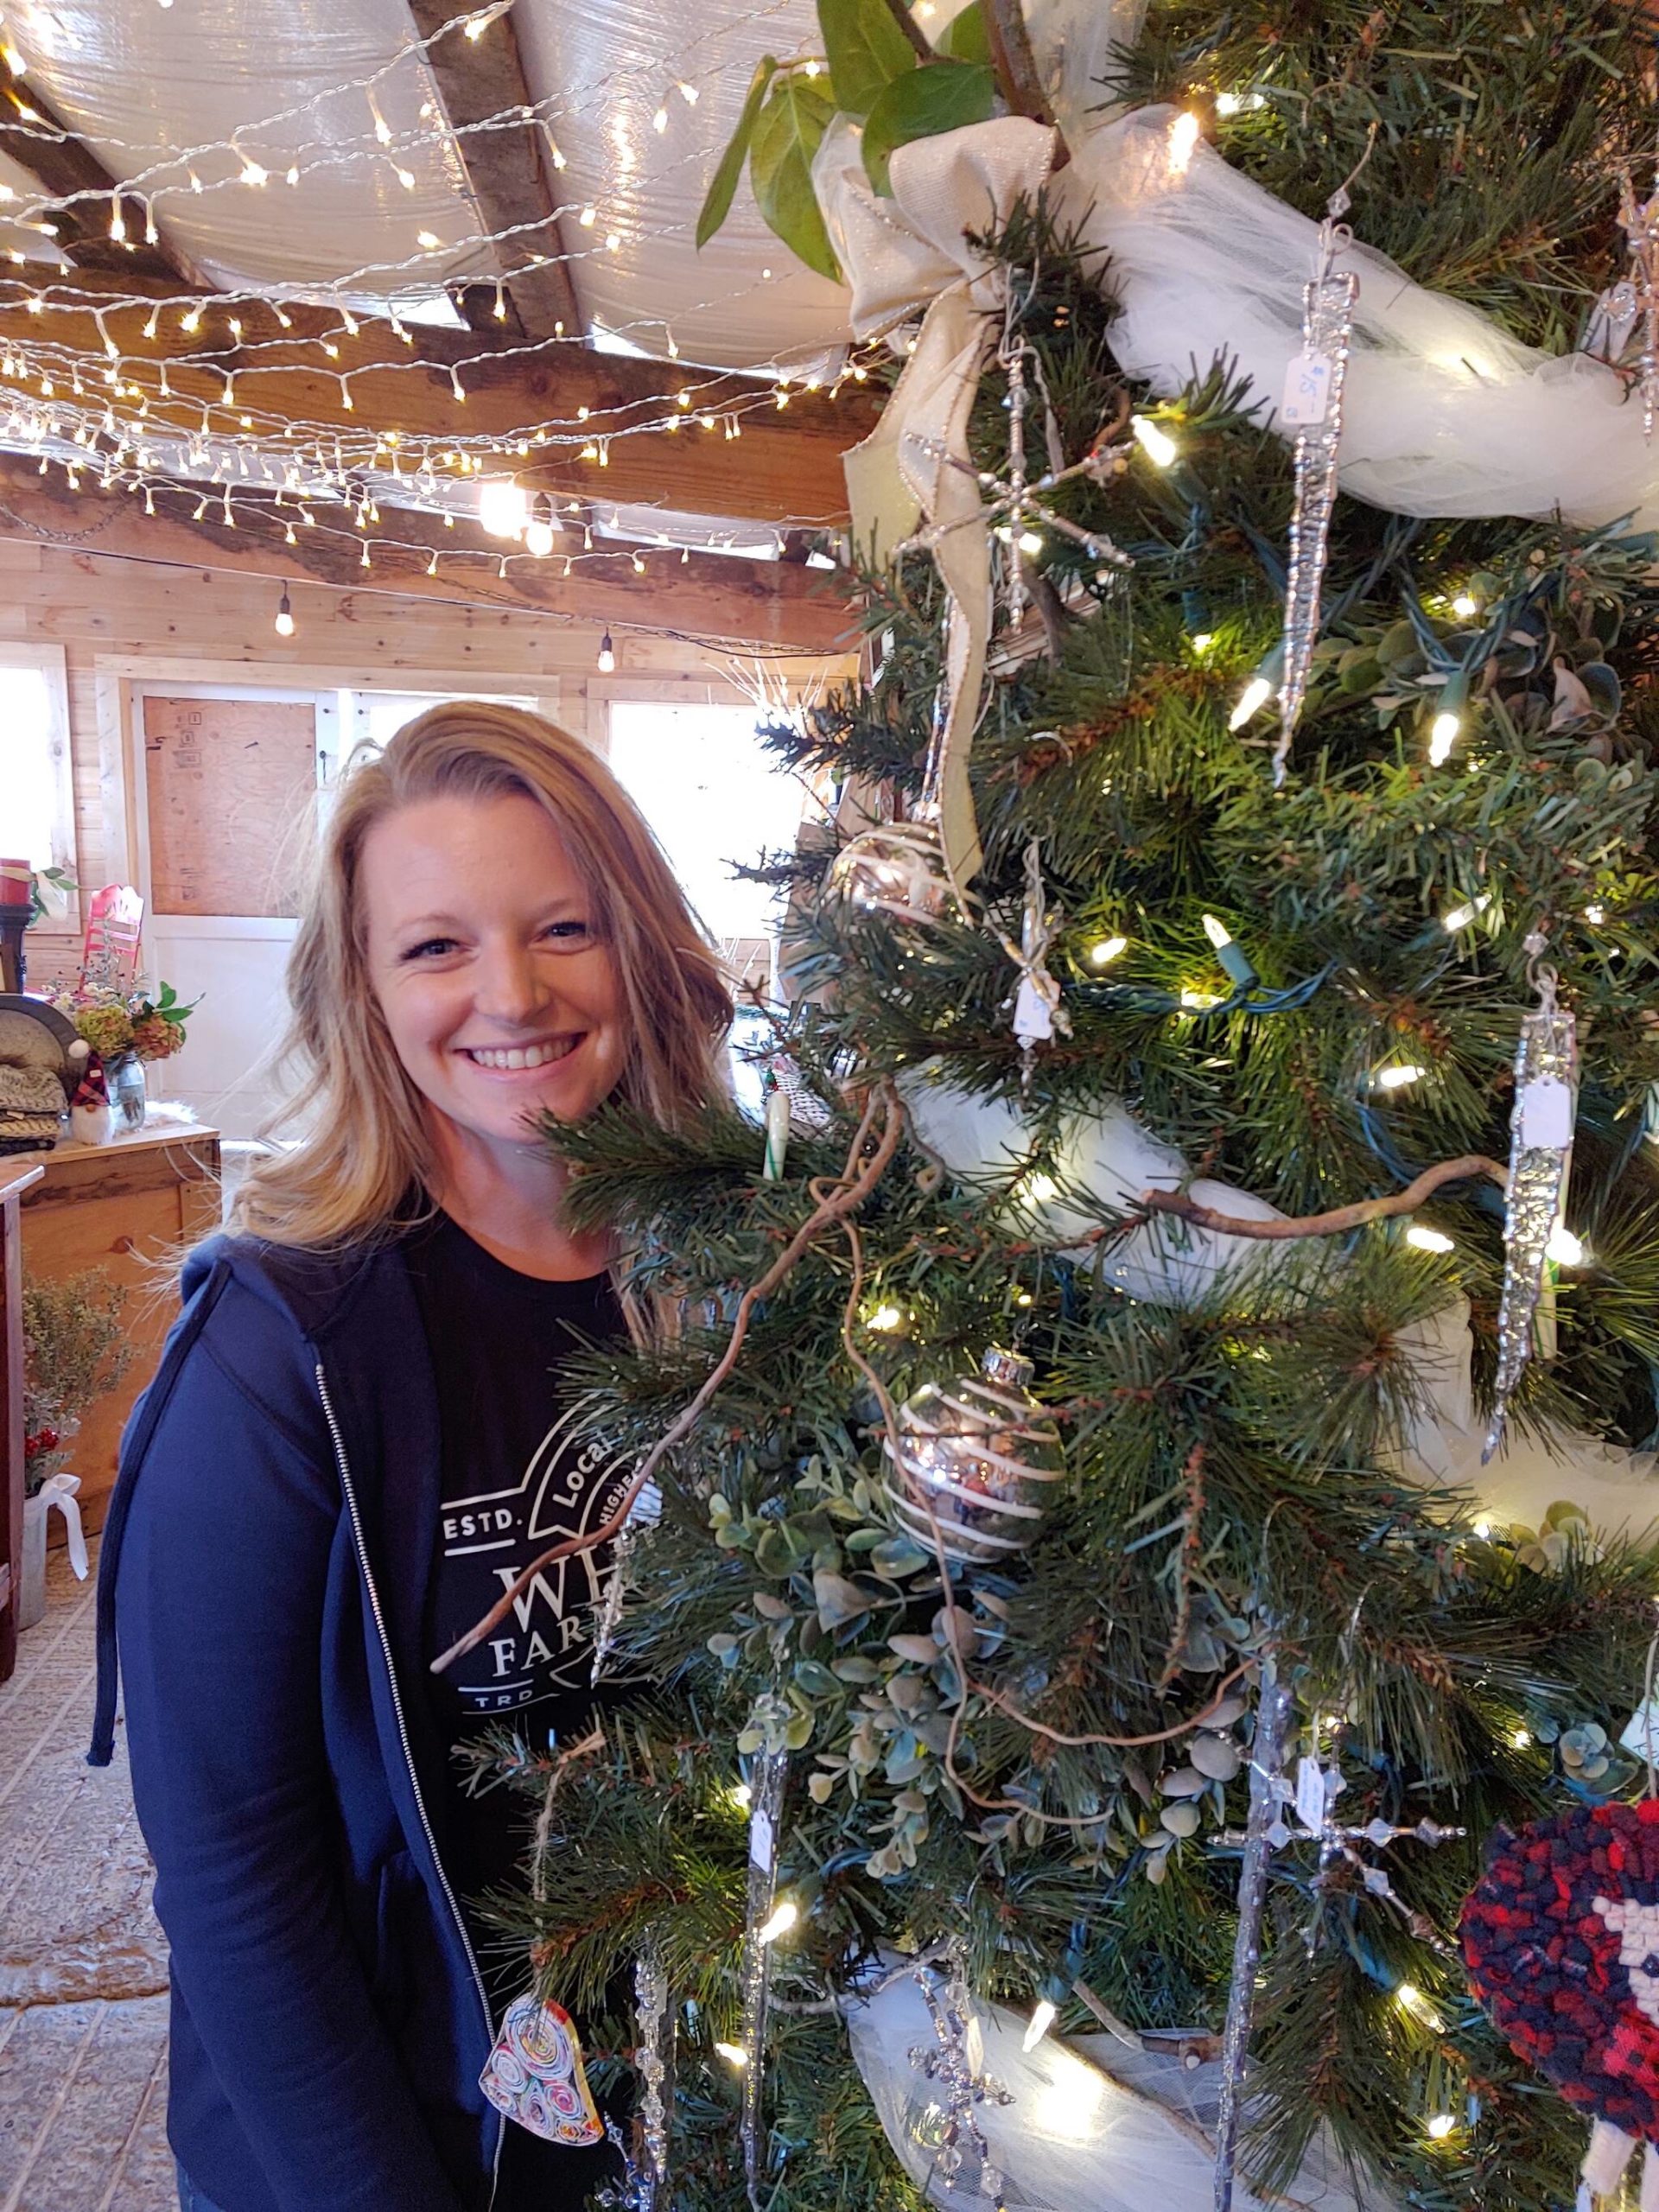 Photo provided
Whidbey Farm and Market is partnering with local nonprofits to help provide Christmas for island families. Above, Shannon Hamilton helps spread Christmas cheer in the market shop.